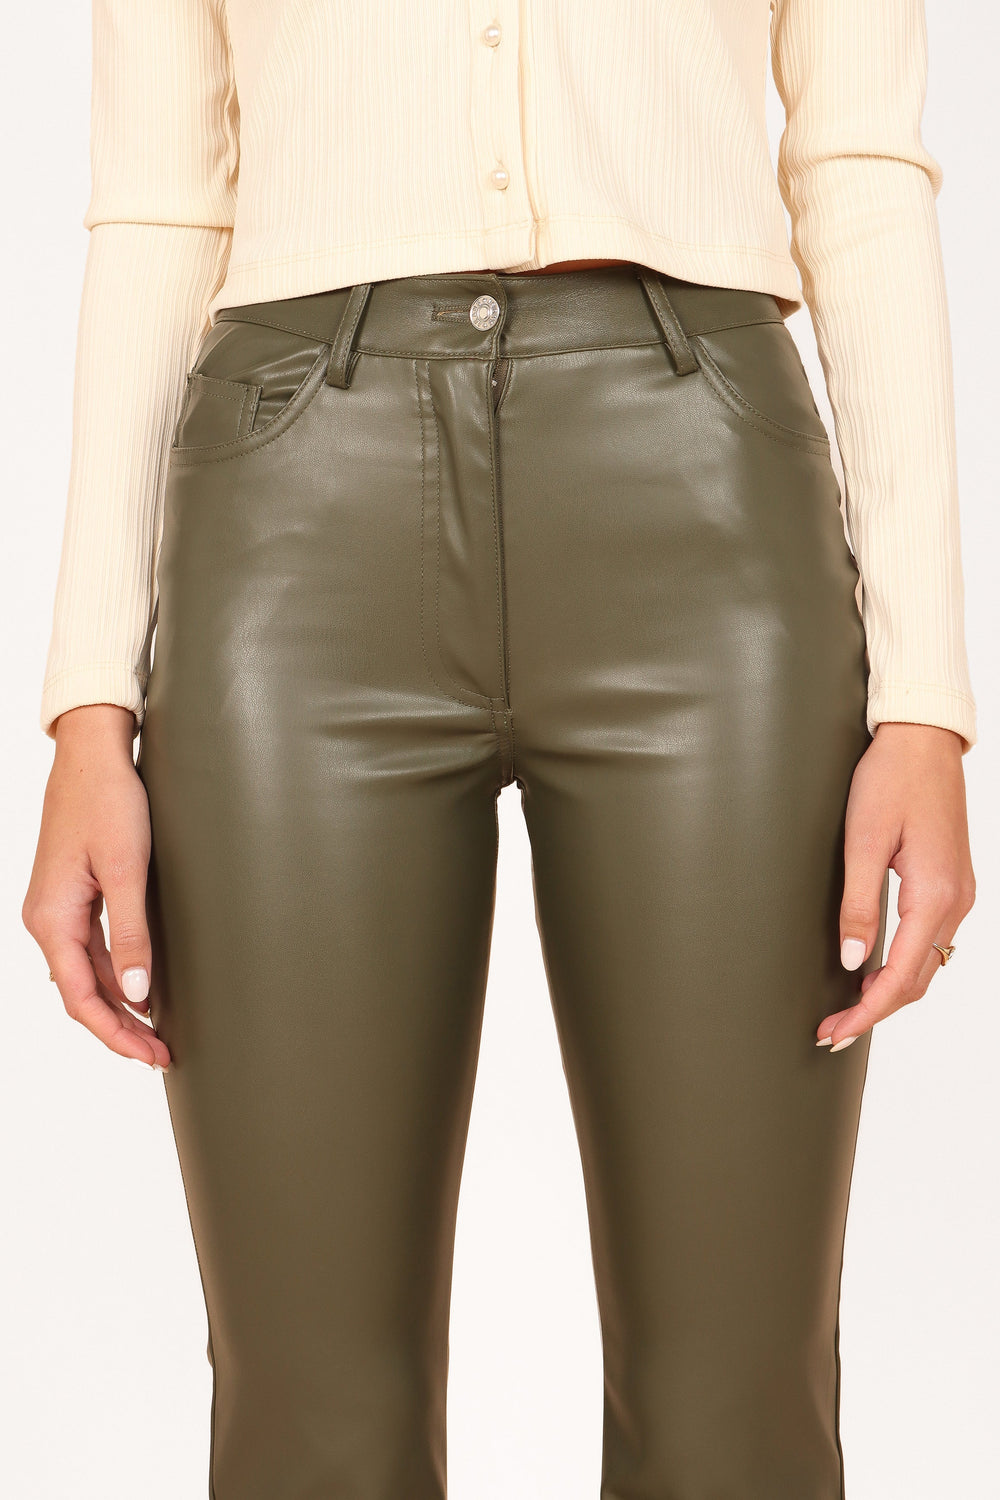 Petal and Pup USA BOTTOMS Ashley Faux Leather Pants - Olive